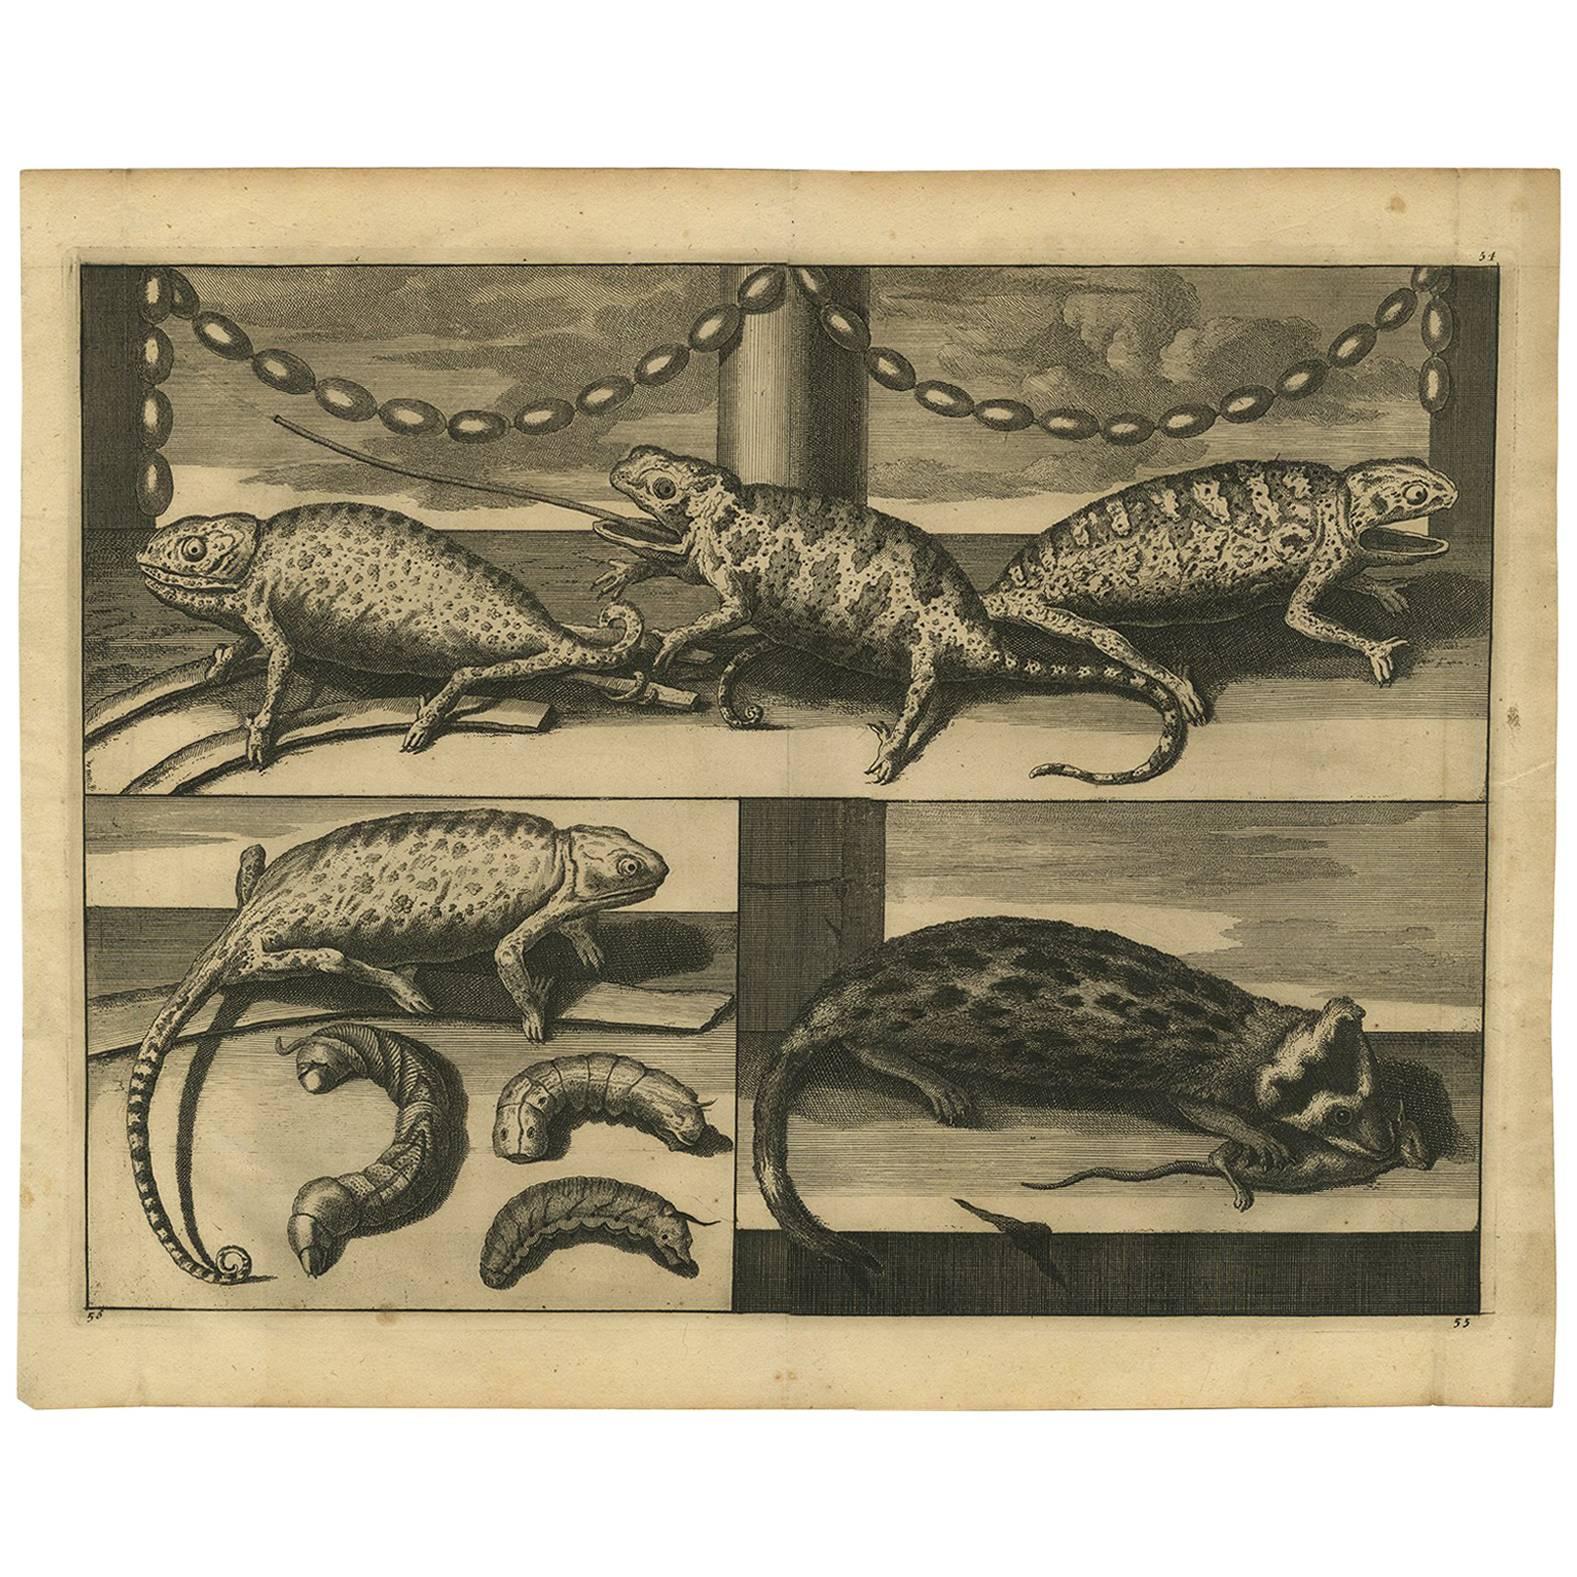 Antique Animal Print of Asian Chameleons and Rodent Species, 1700